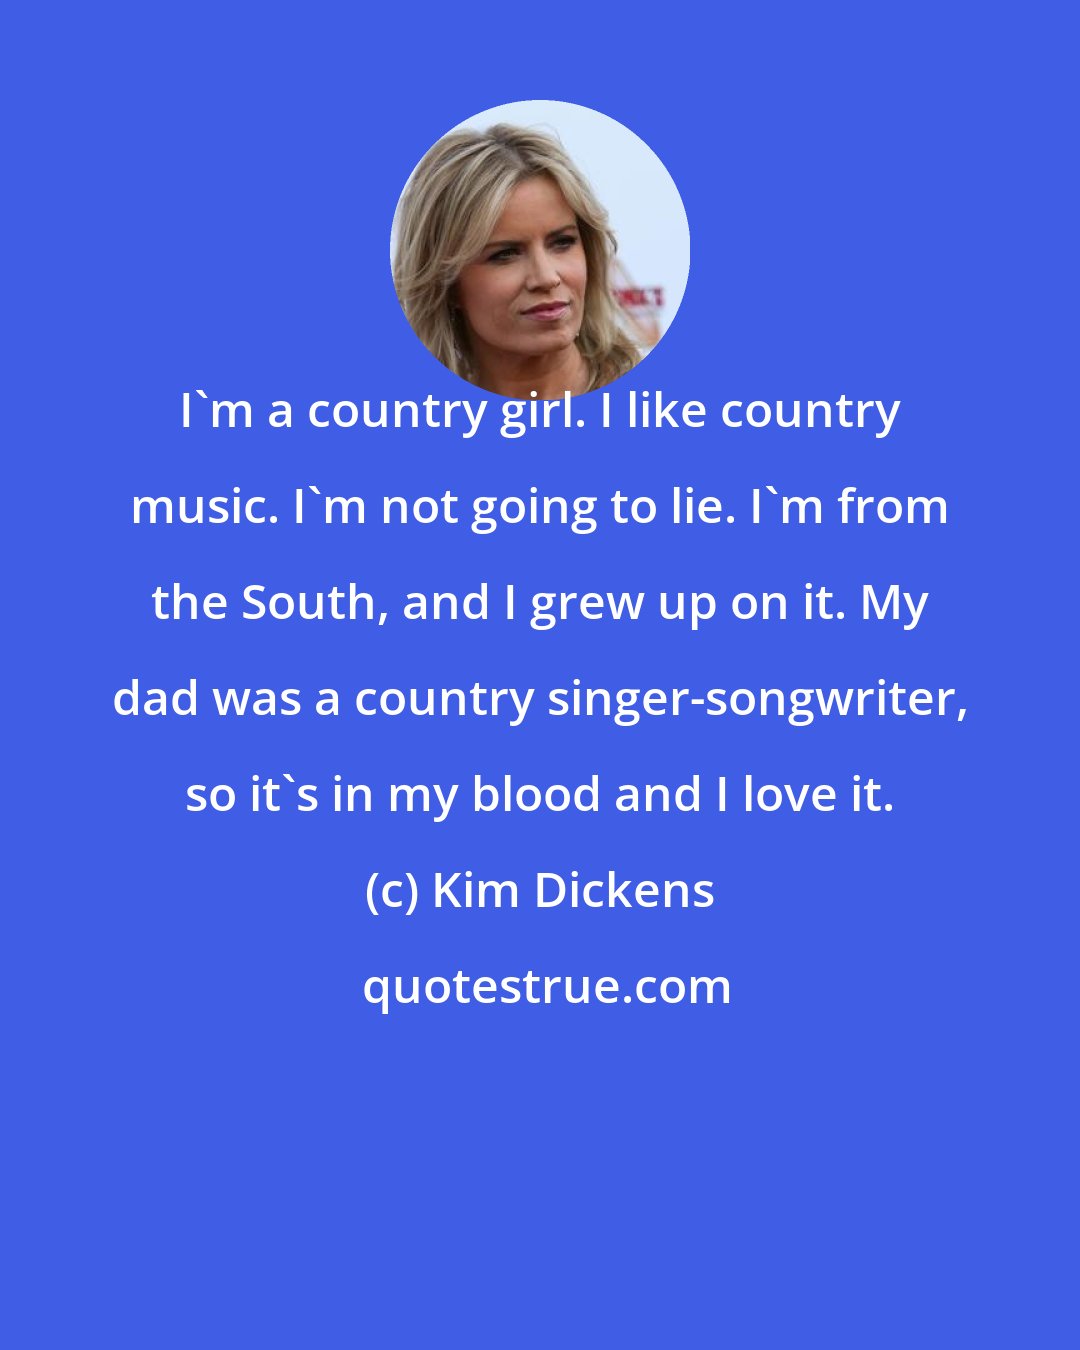 Kim Dickens: I'm a country girl. I like country music. I'm not going to lie. I'm from the South, and I grew up on it. My dad was a country singer-songwriter, so it's in my blood and I love it.